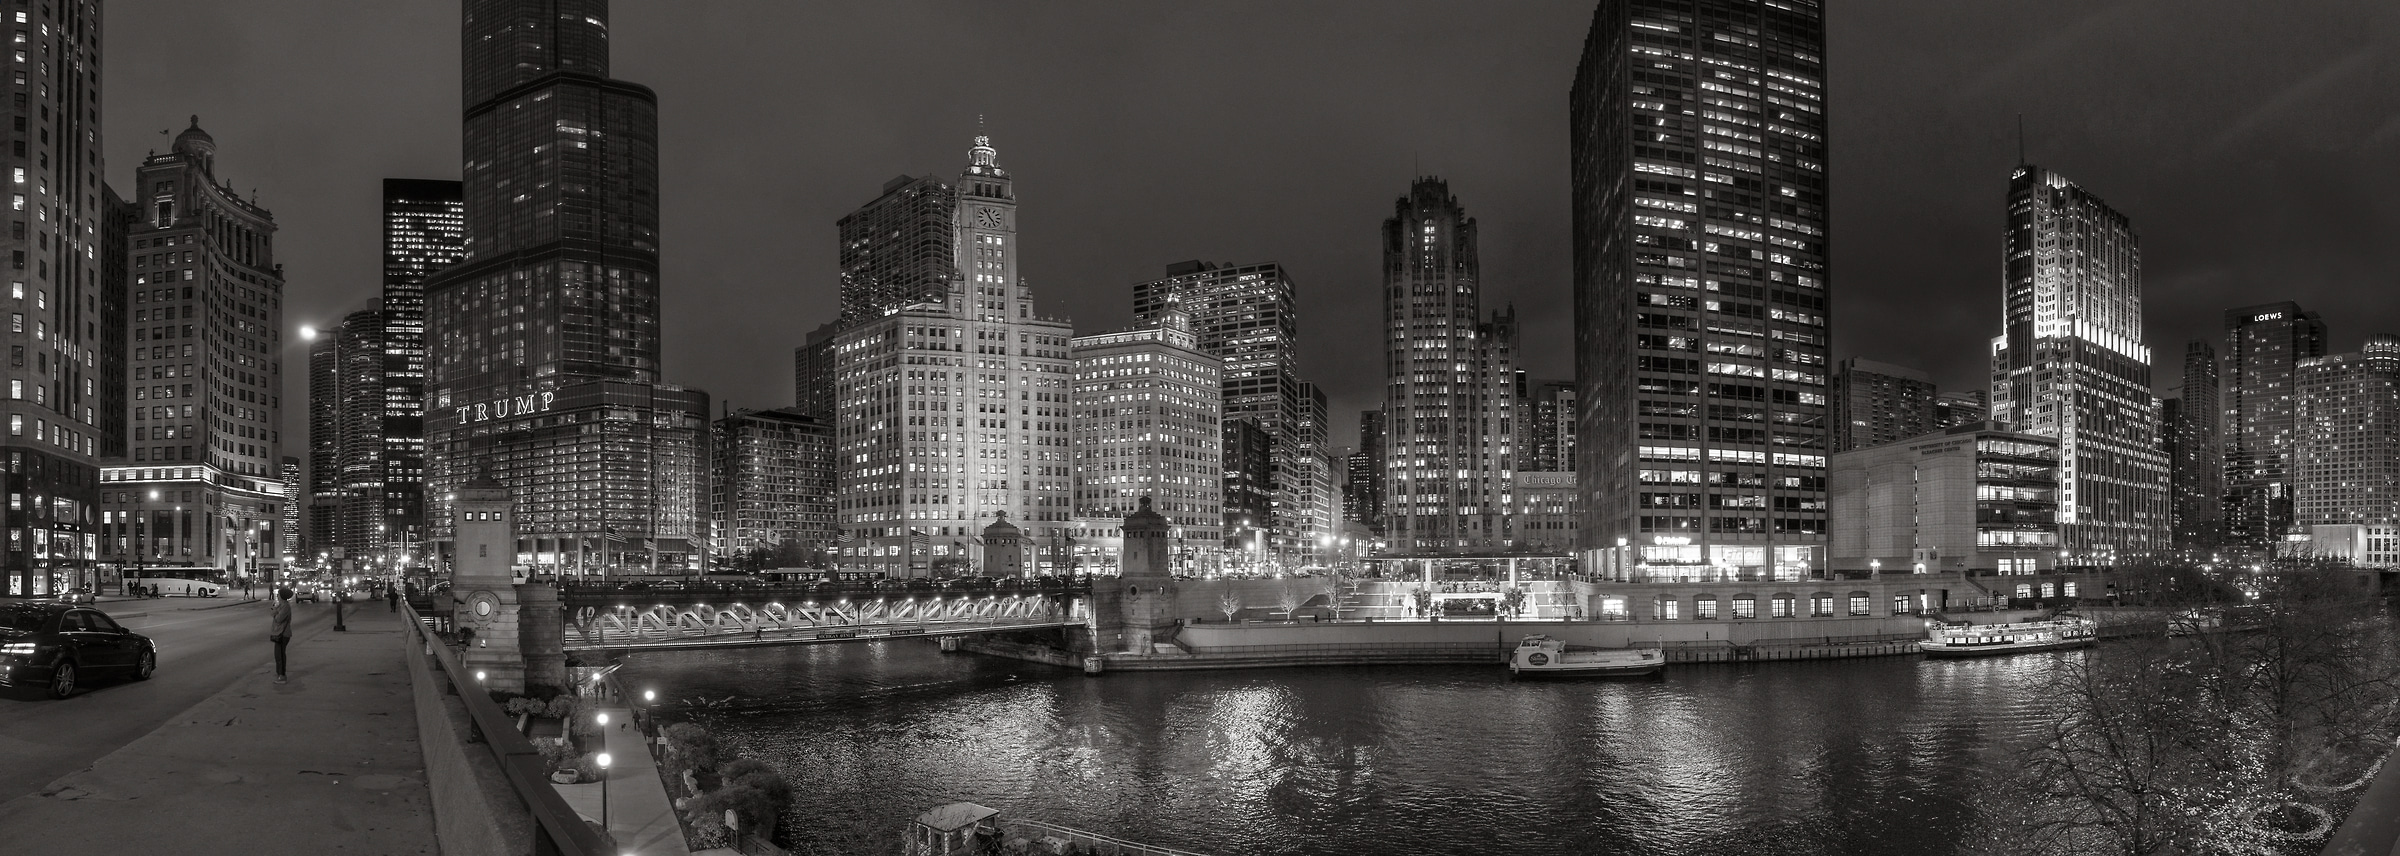 240 megapixels! A very high resolution, black & white VAST photo print of the Chicago River at night with the Chicago skyline; black & white cityscape photograph created by Peter Rodger in Chicago River, Michigan Avenue, Chicago.